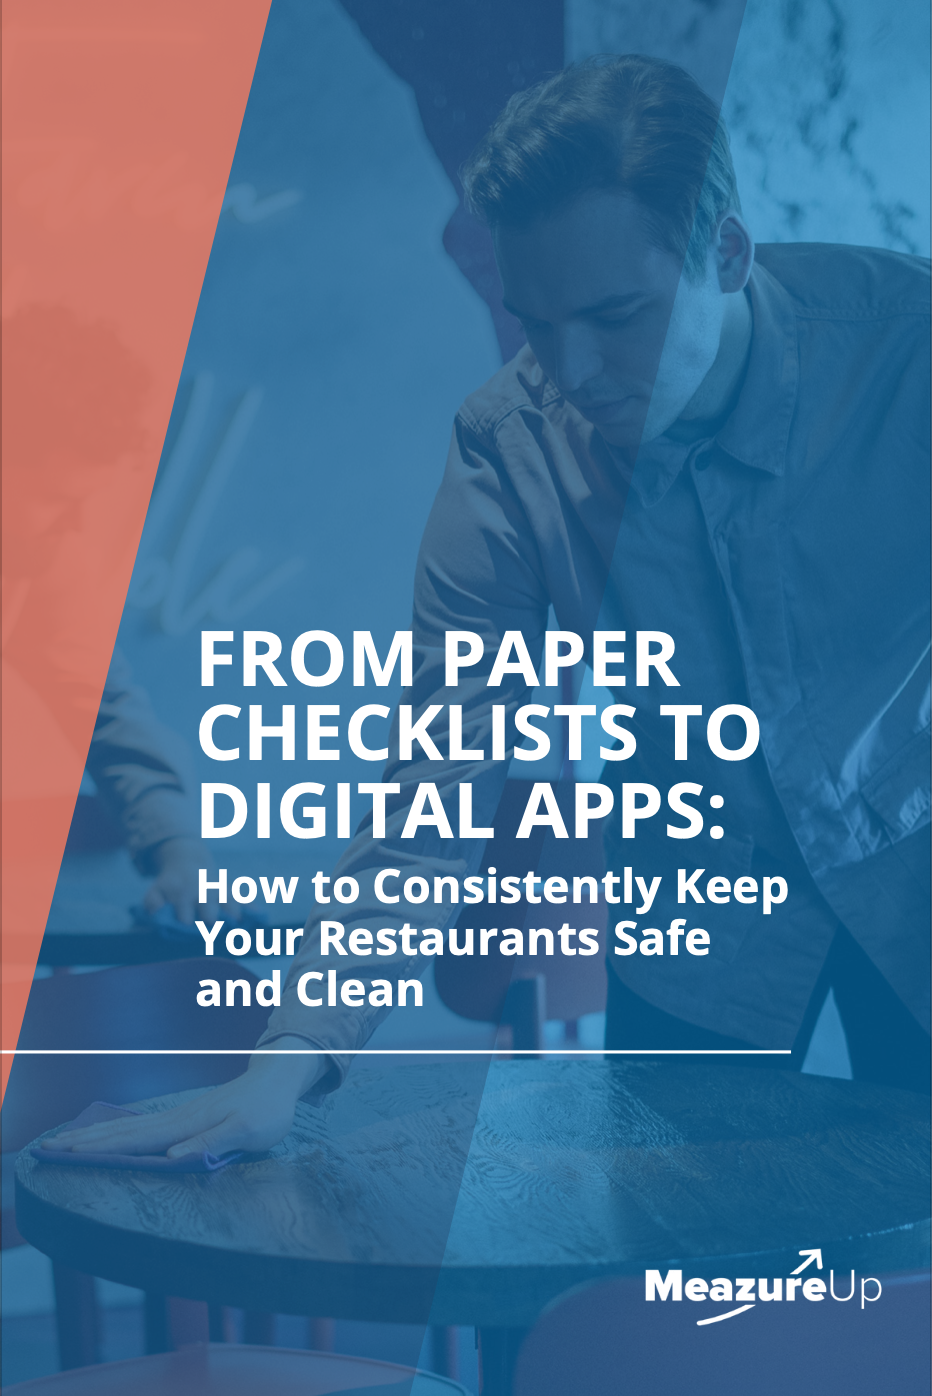 From Paper Checklists to Digital Apps: How to Consistently Keep your Restaurant Safe and Clean